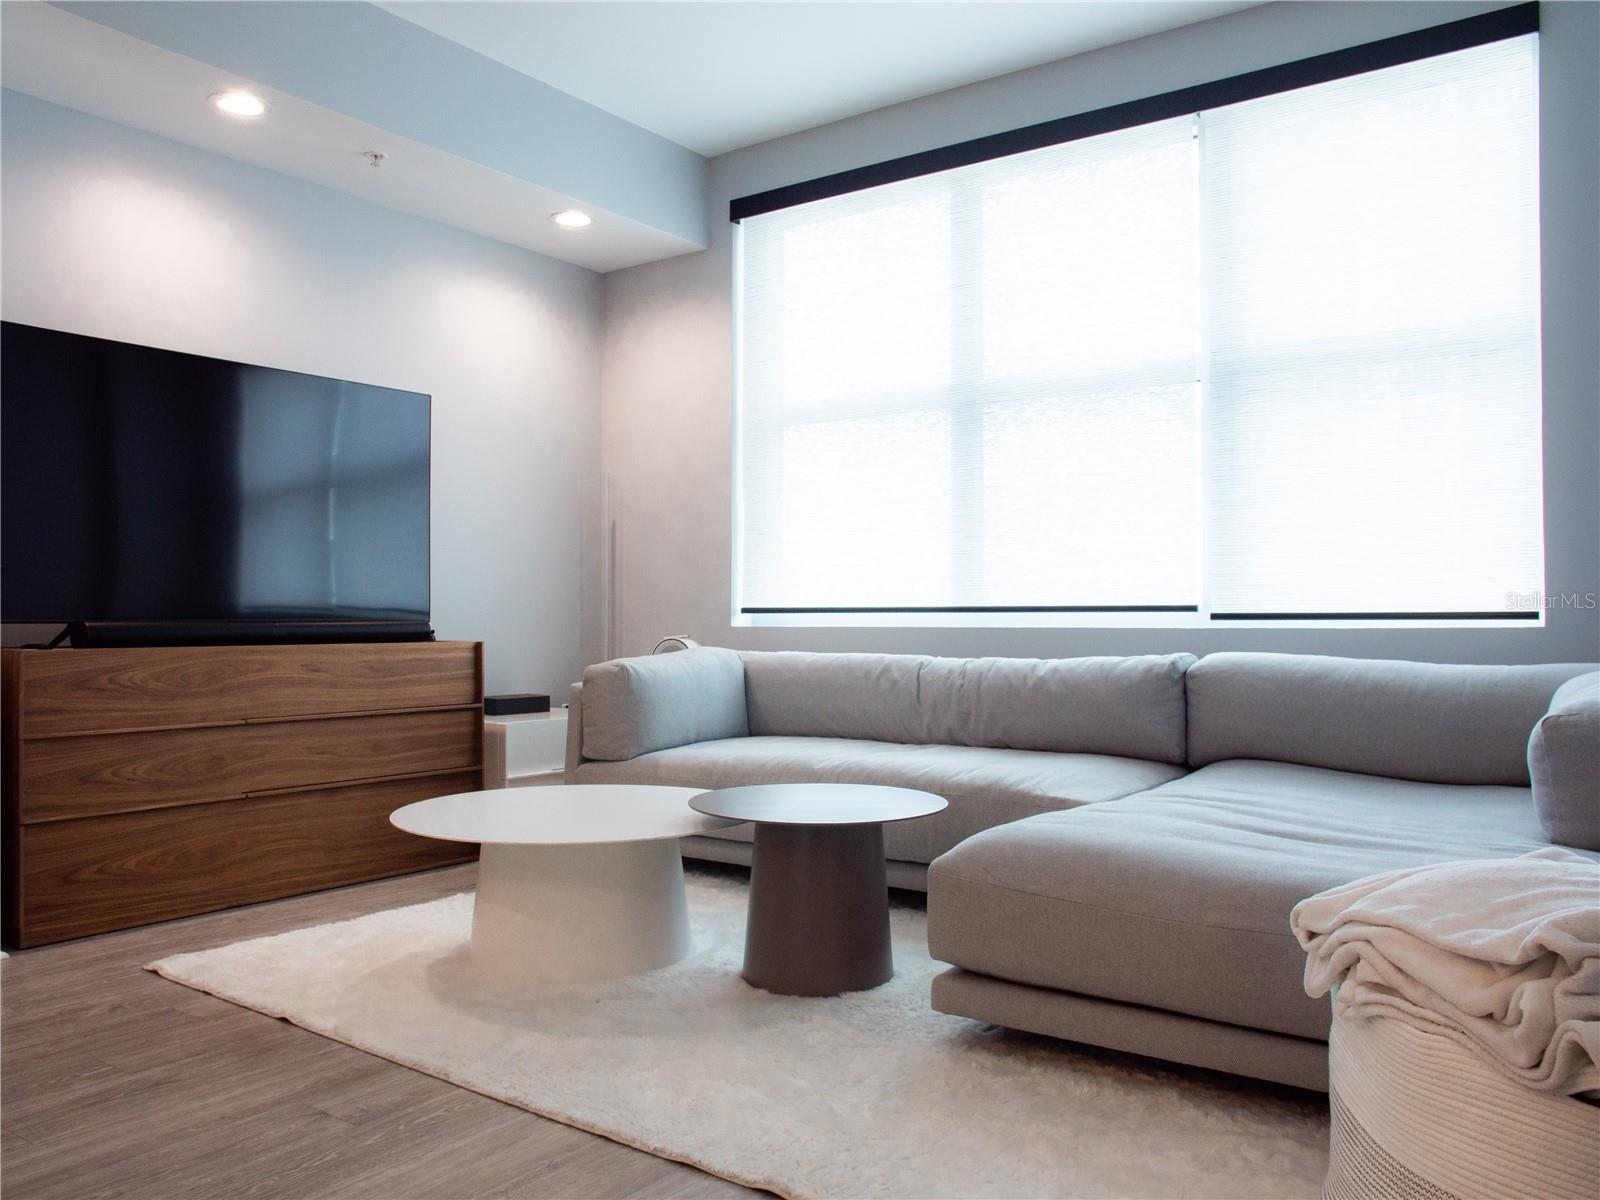 Living room space with remote control shades